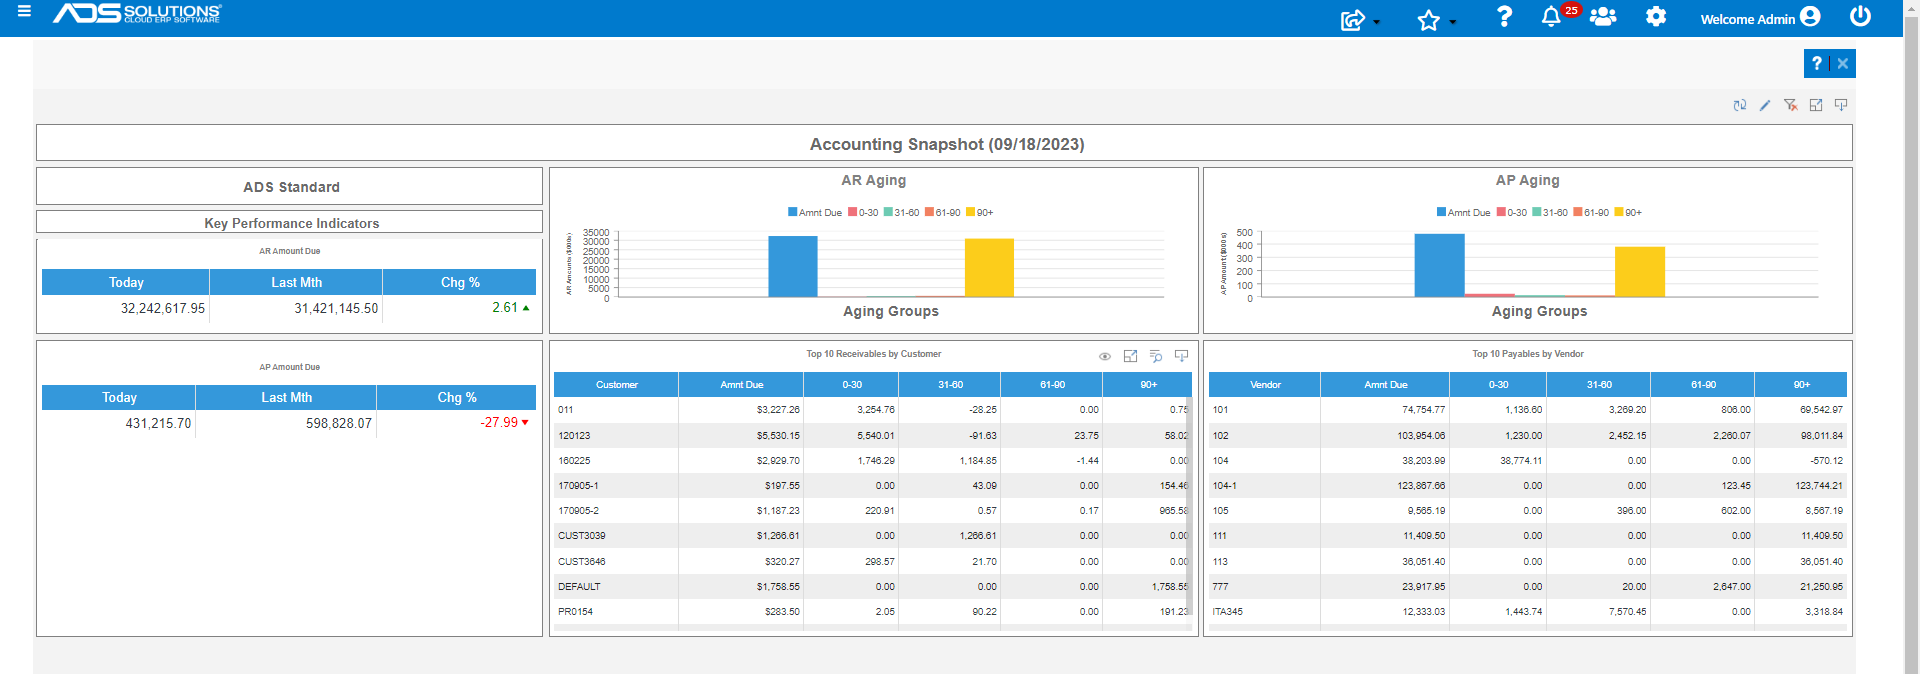 Accounting dashboard which is one of several editable Key Performance Indicators that are delivered automatically and updated continually